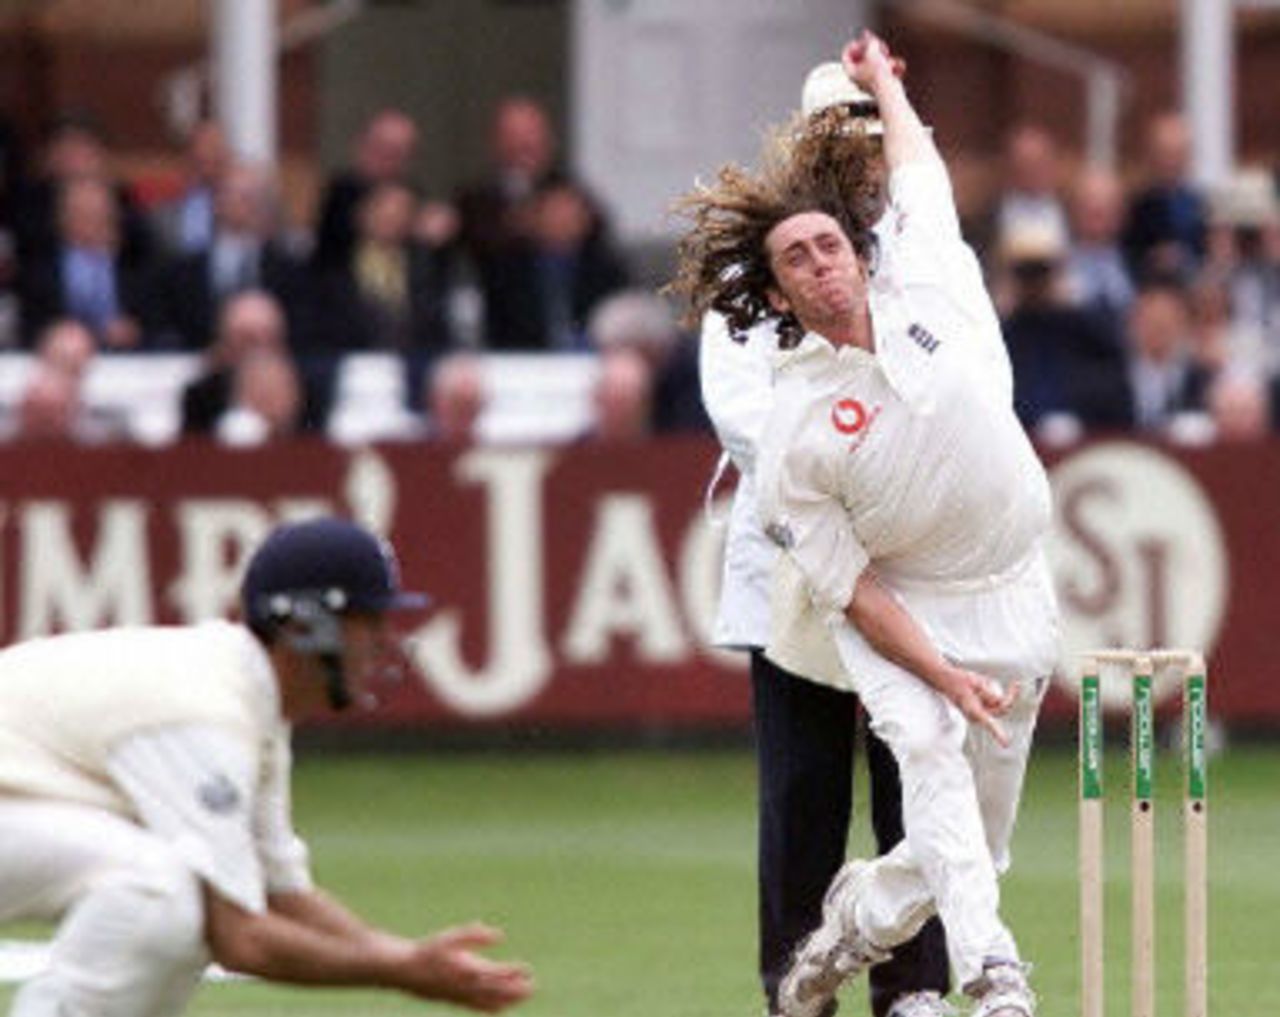 Sidebottom plays his debut match, day 3, 1st Test at Lord's, 17-21 May 2001.